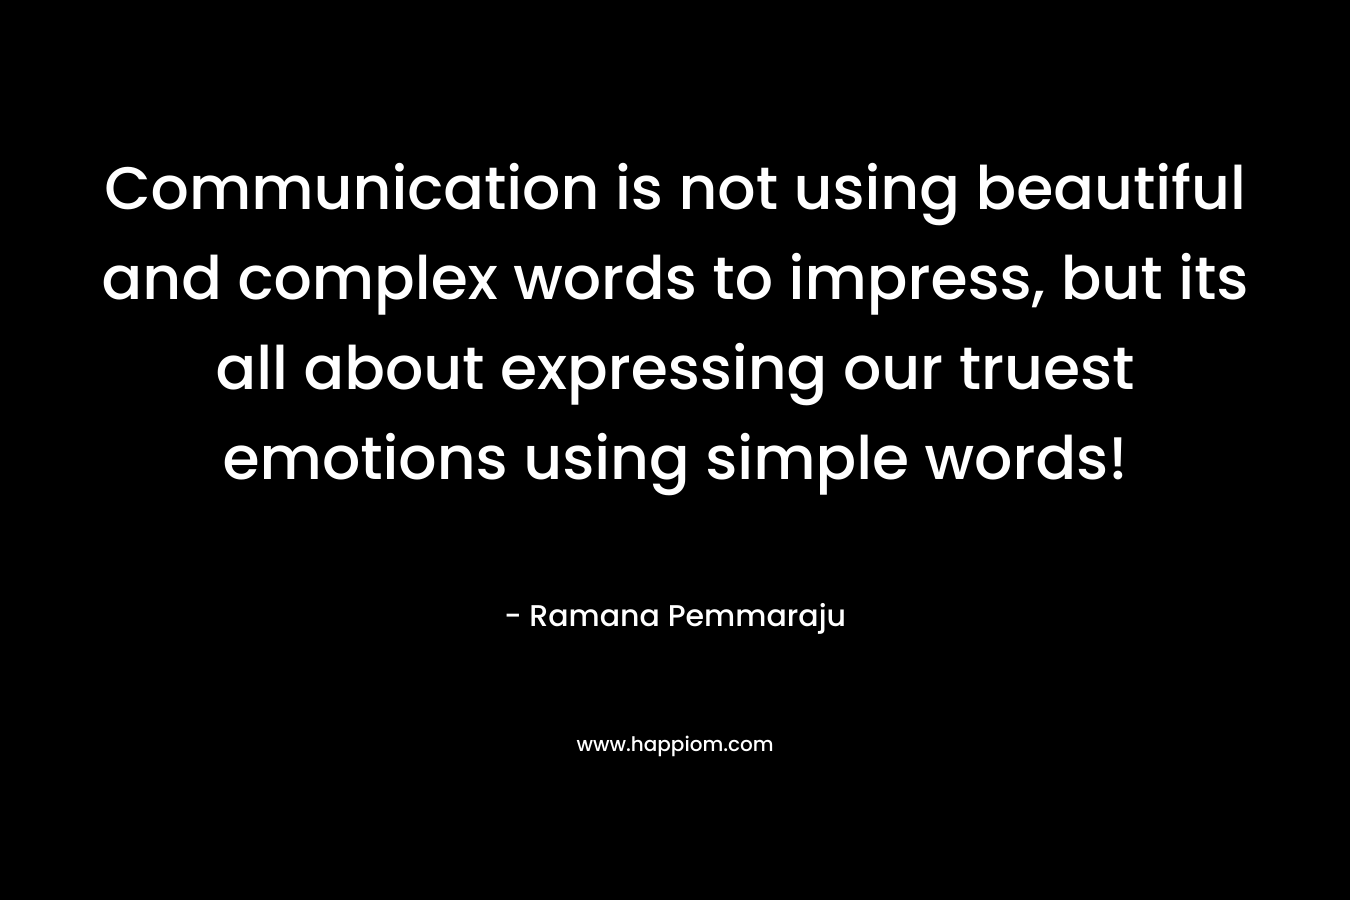 Communication is not using beautiful and complex words to impress, but its all about expressing our truest emotions using simple words!